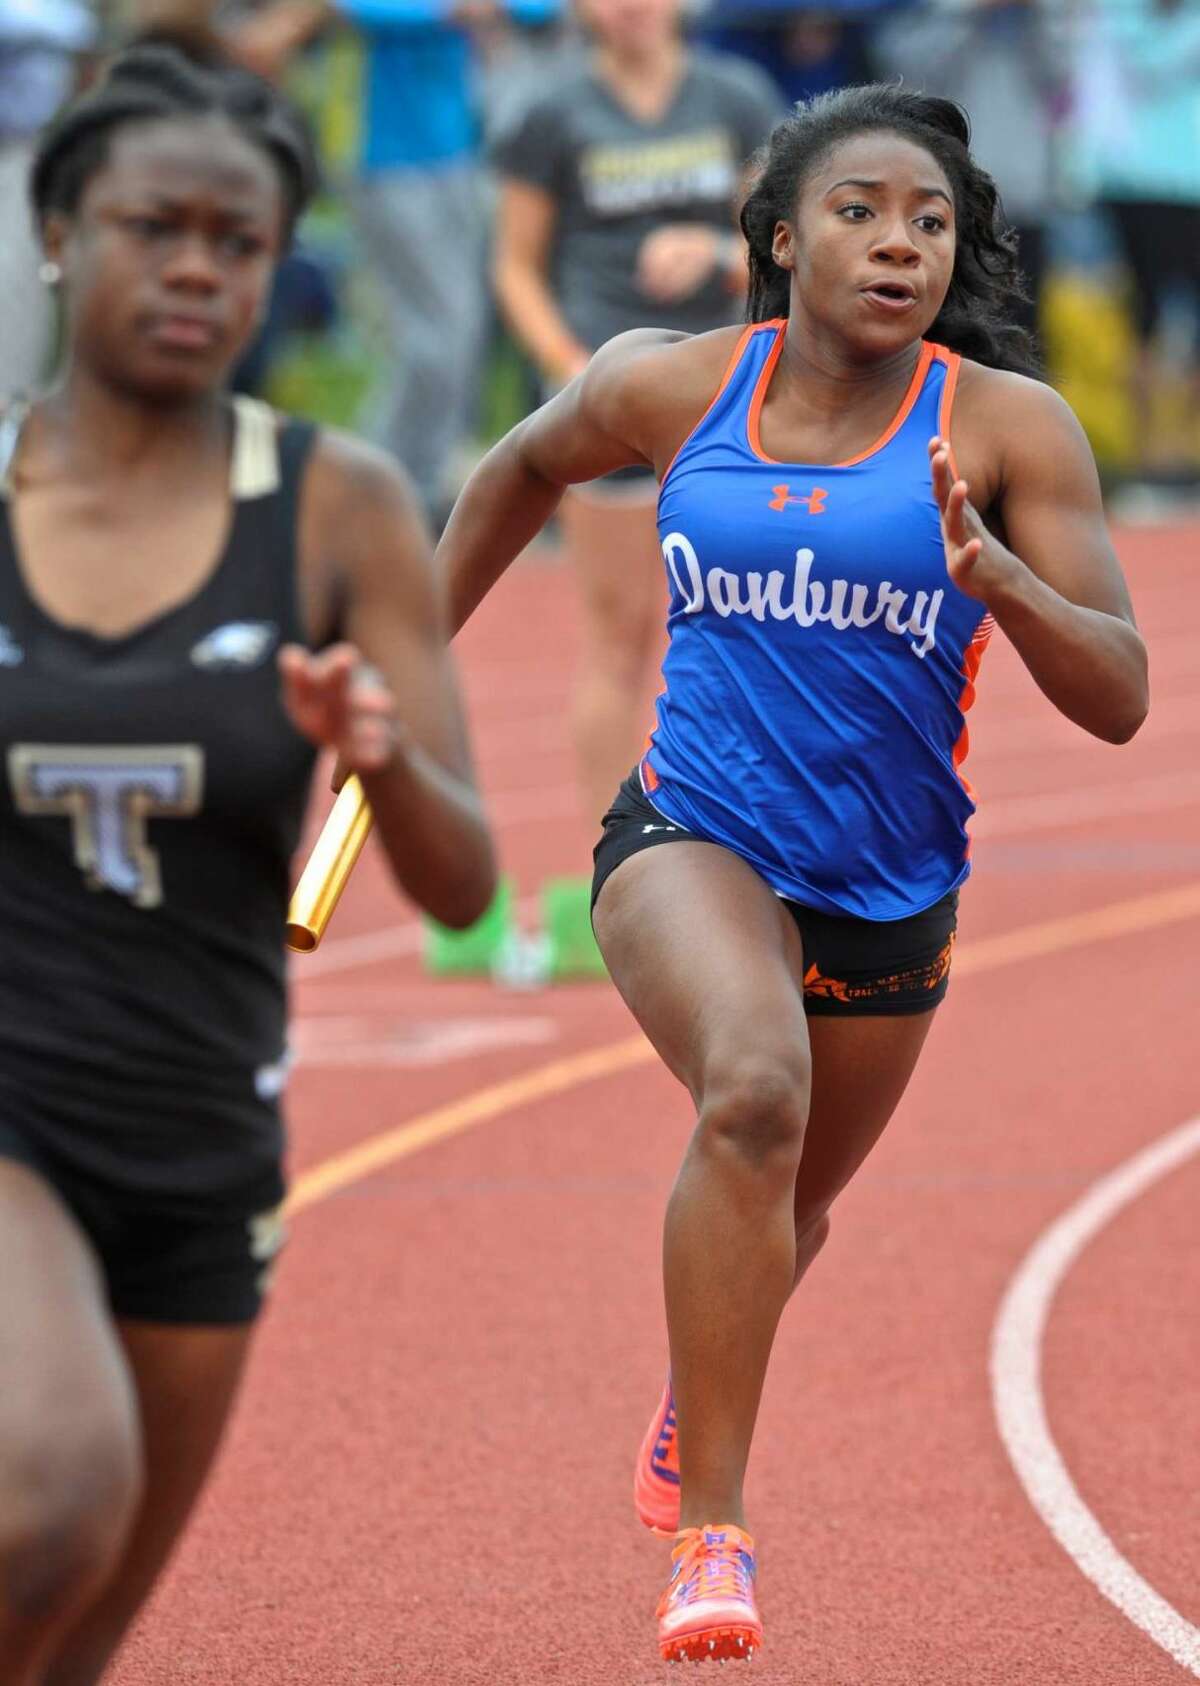 Saintphanie Porcenat runs the first leg of the girls 4x100 meter relay for Danbury during the FCIAC girls track championships, held at Bethel High School, Saturday, May 21, 2016, in Bethel, Conn.